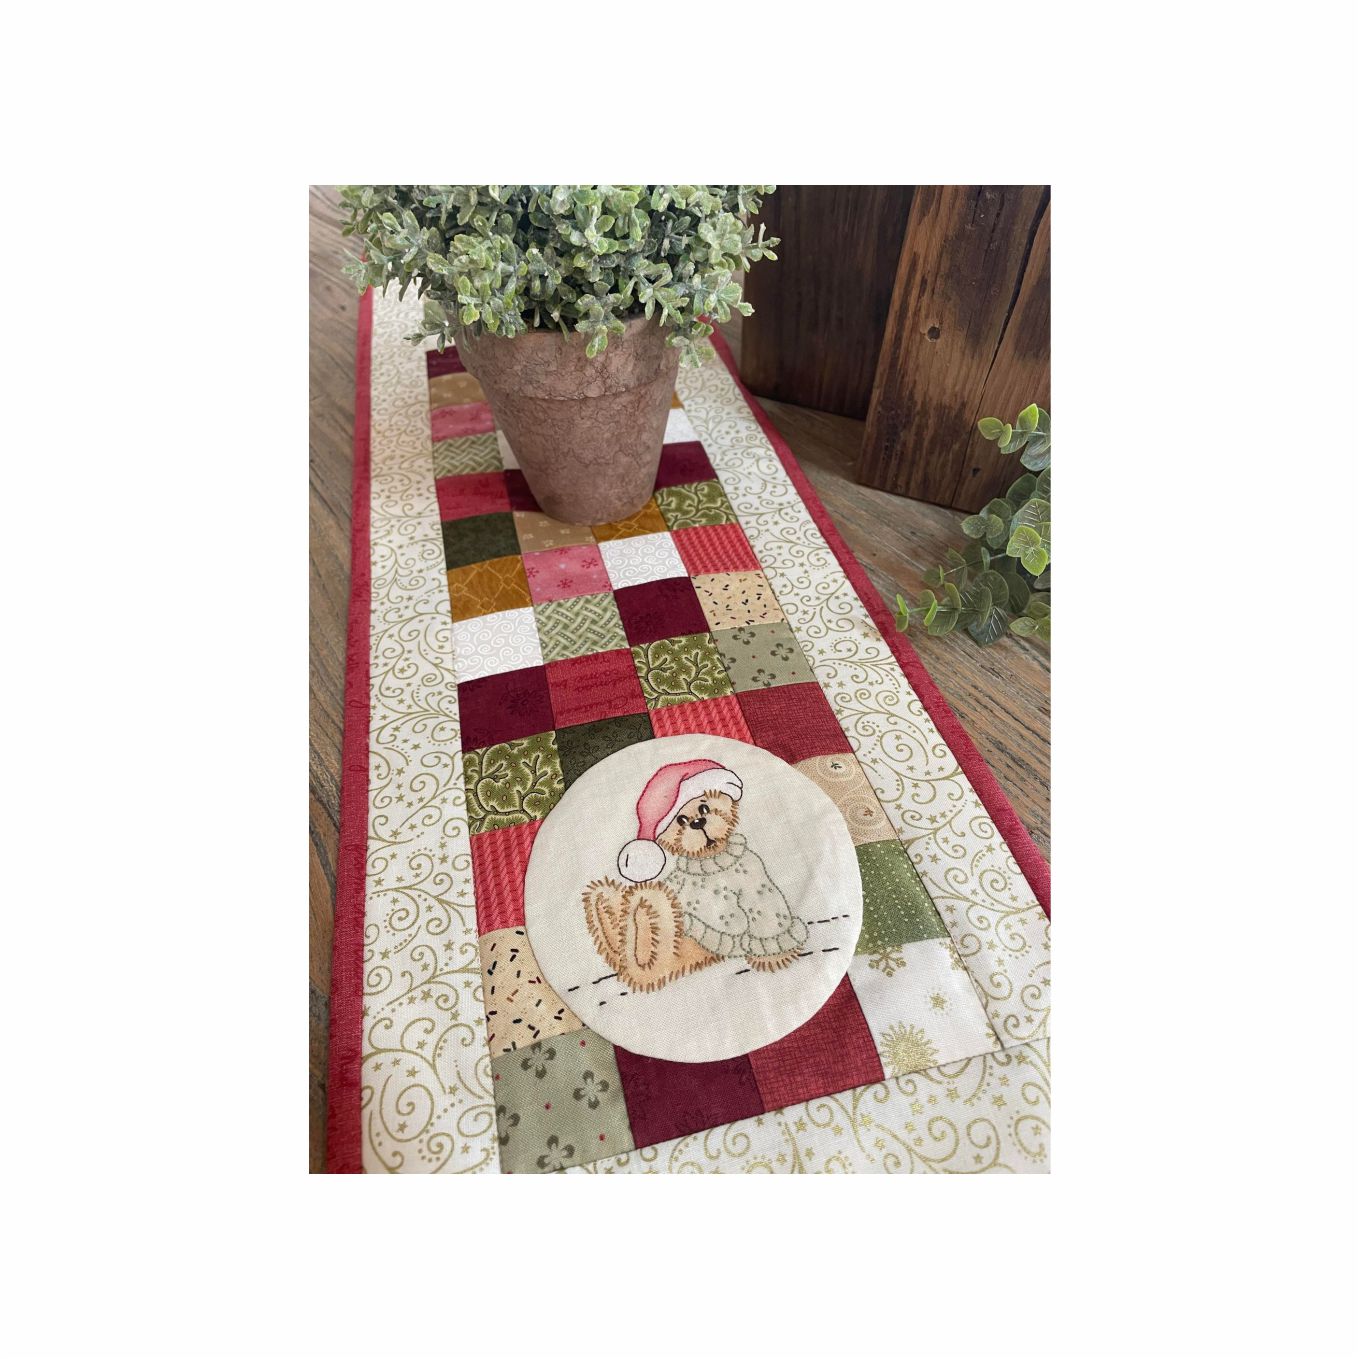 Christmas table runner pattern and fabric kit